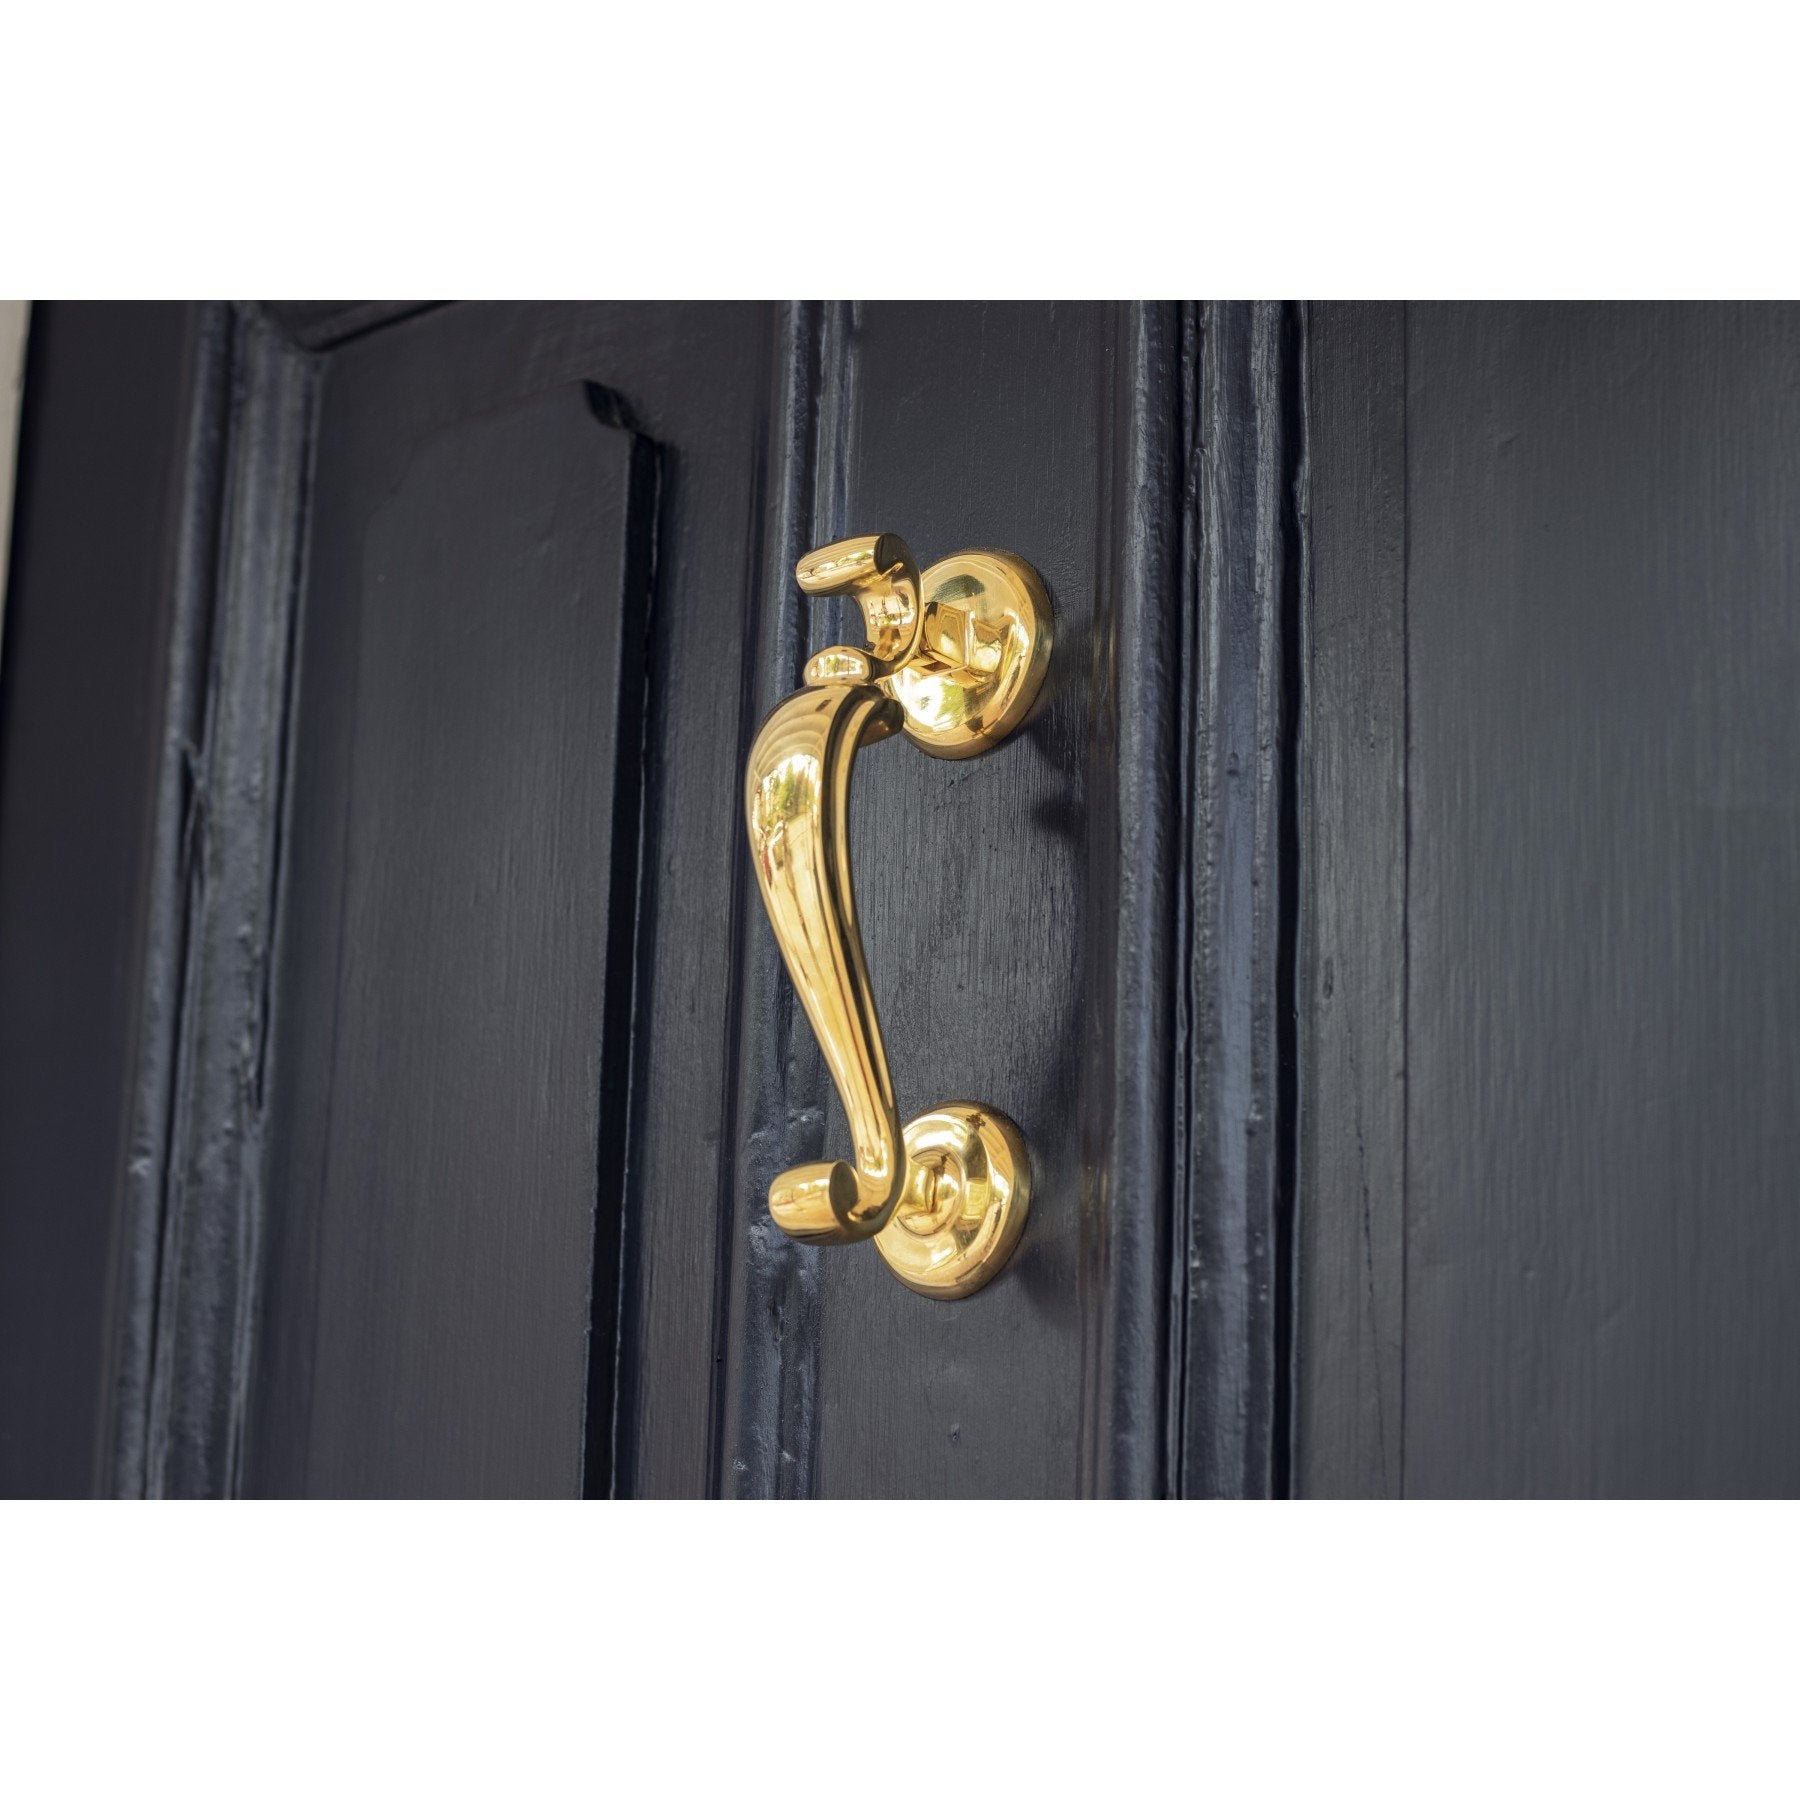 From the Anvil Polished Brass Doctors Door Knocker